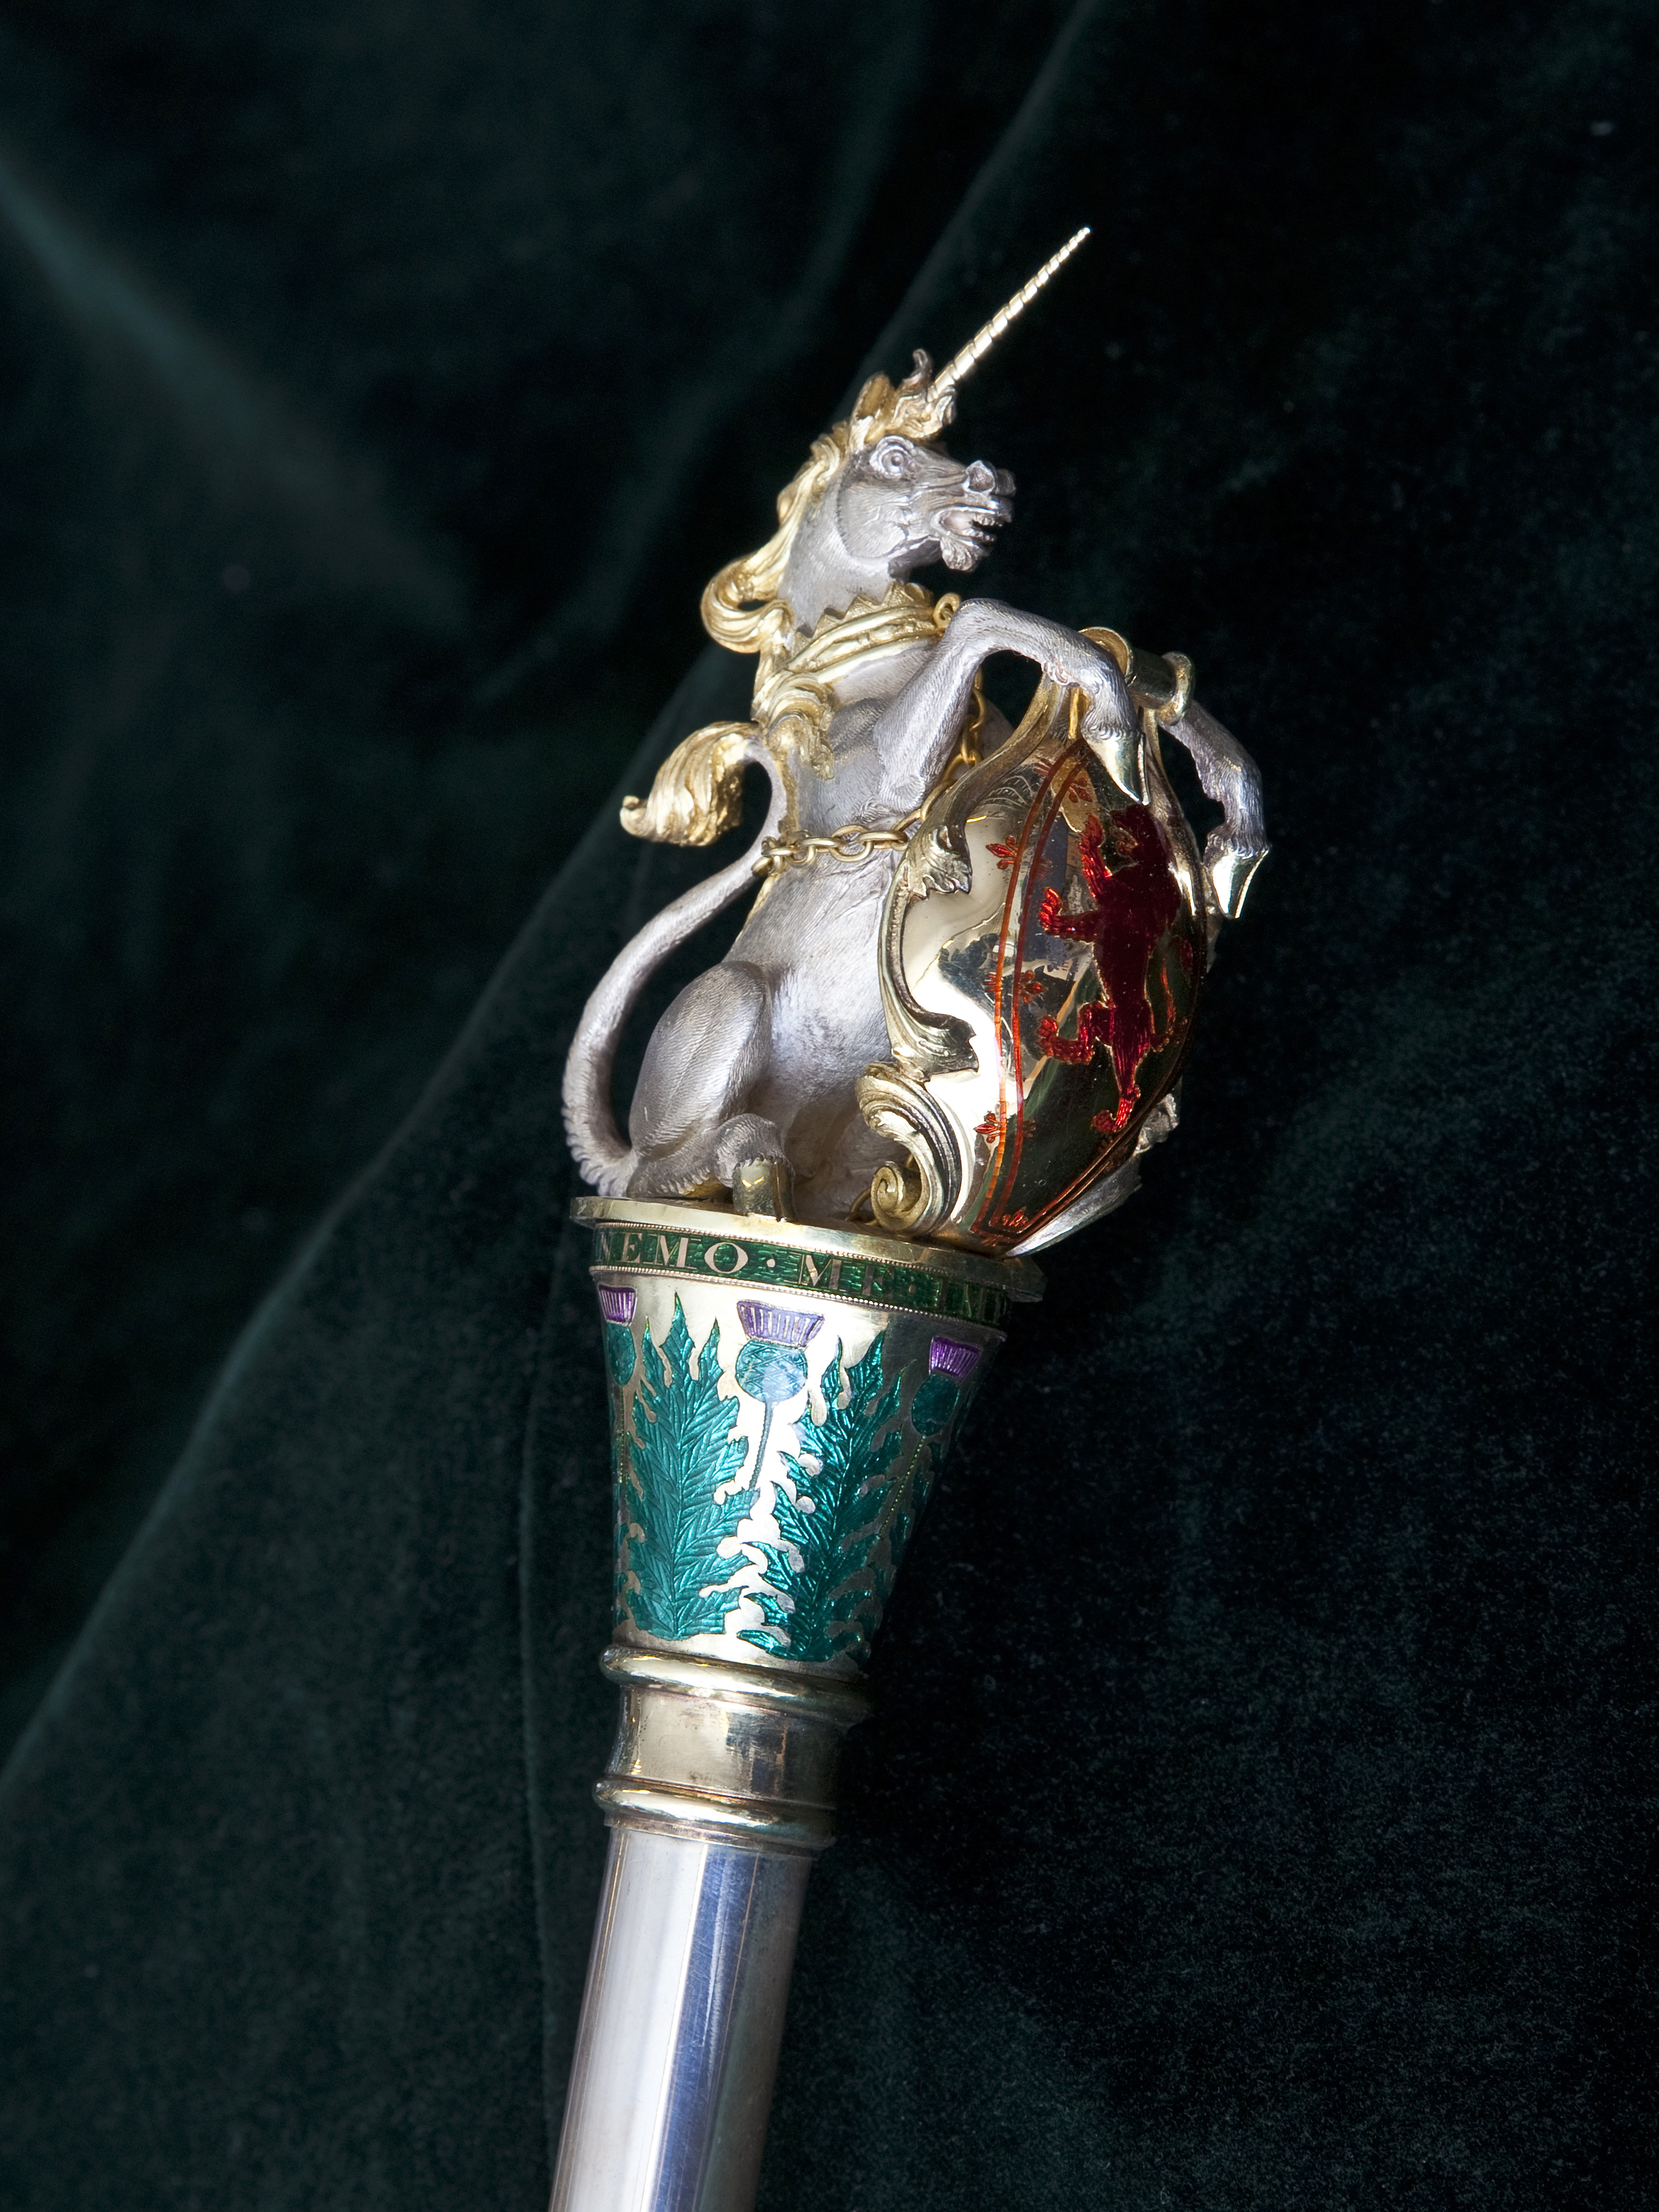 Culture Perth & Kinross - A regal silver unicorn features atop the 19th century ceremonial rod or wand, part of the regalia of the Usher of the White Rod reproduced by Permission of the Trustees and Factor and Commissioner of the Walker Trust. Photography by National Museums Scotland